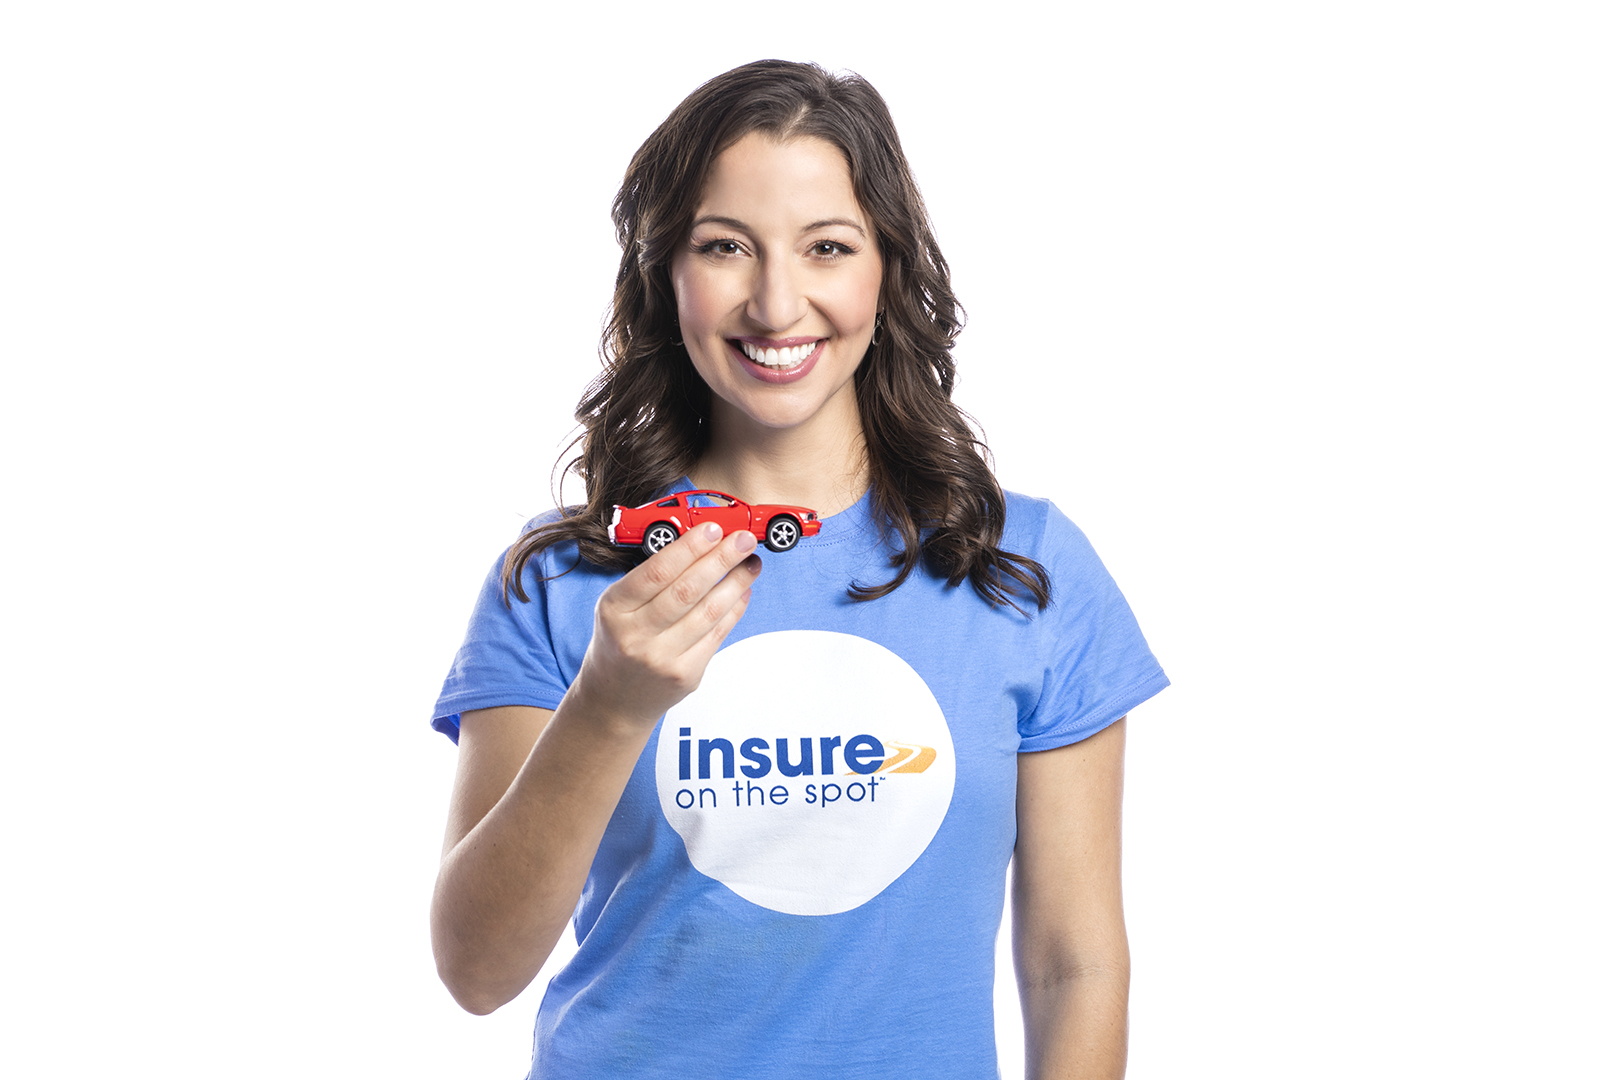 Who is the Insure on the Spot Spokeswoman.